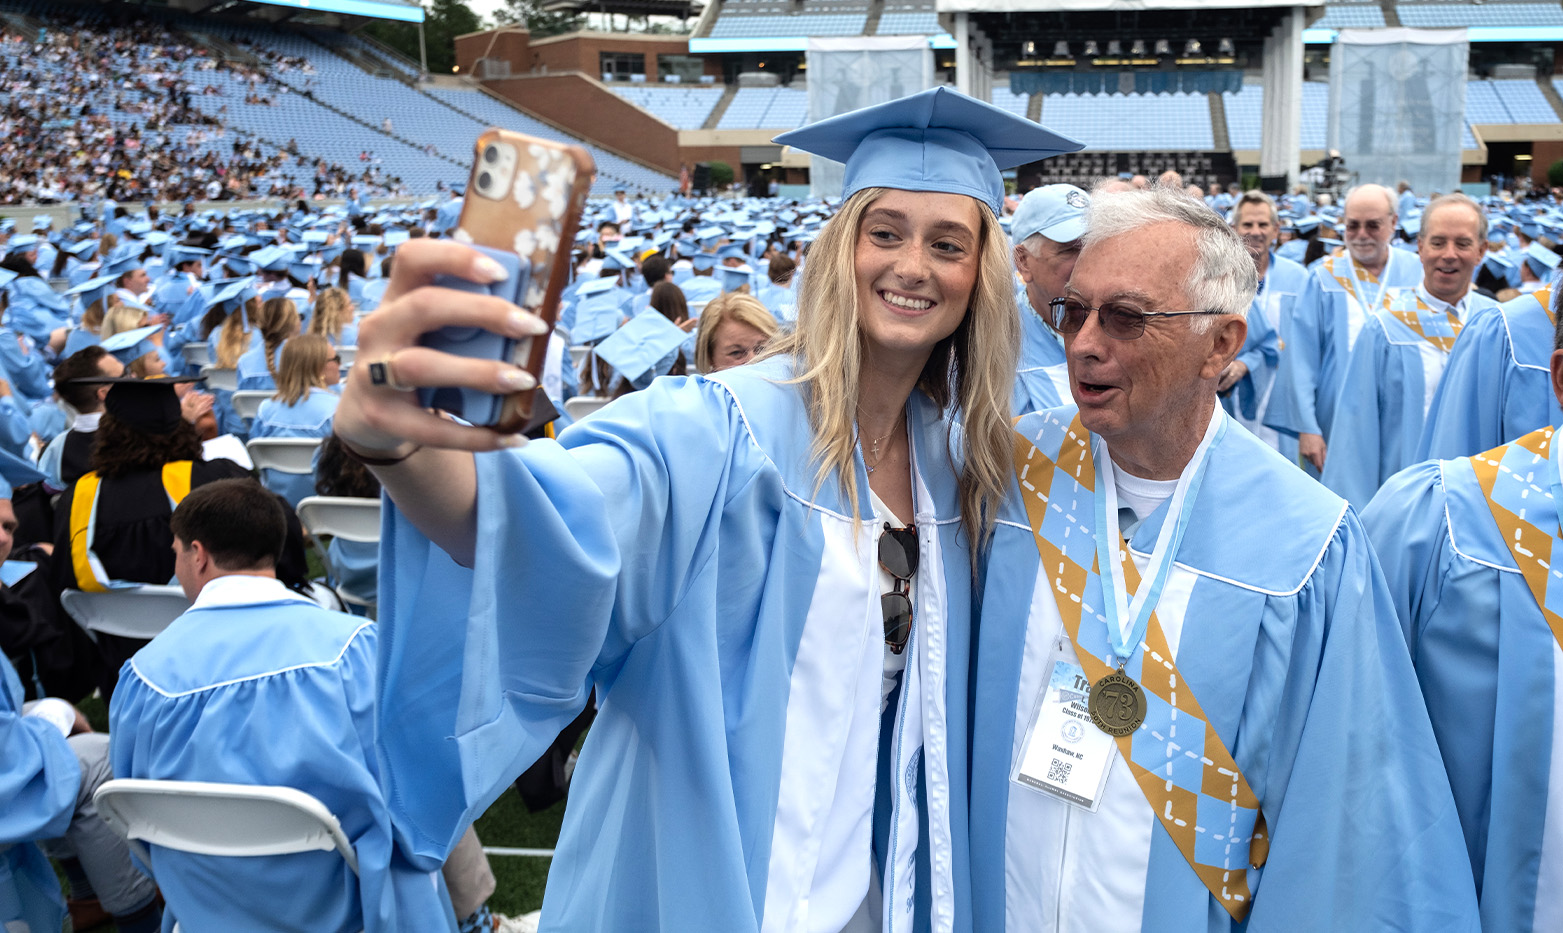 A student takes a photo with a member of the Class of 1973.